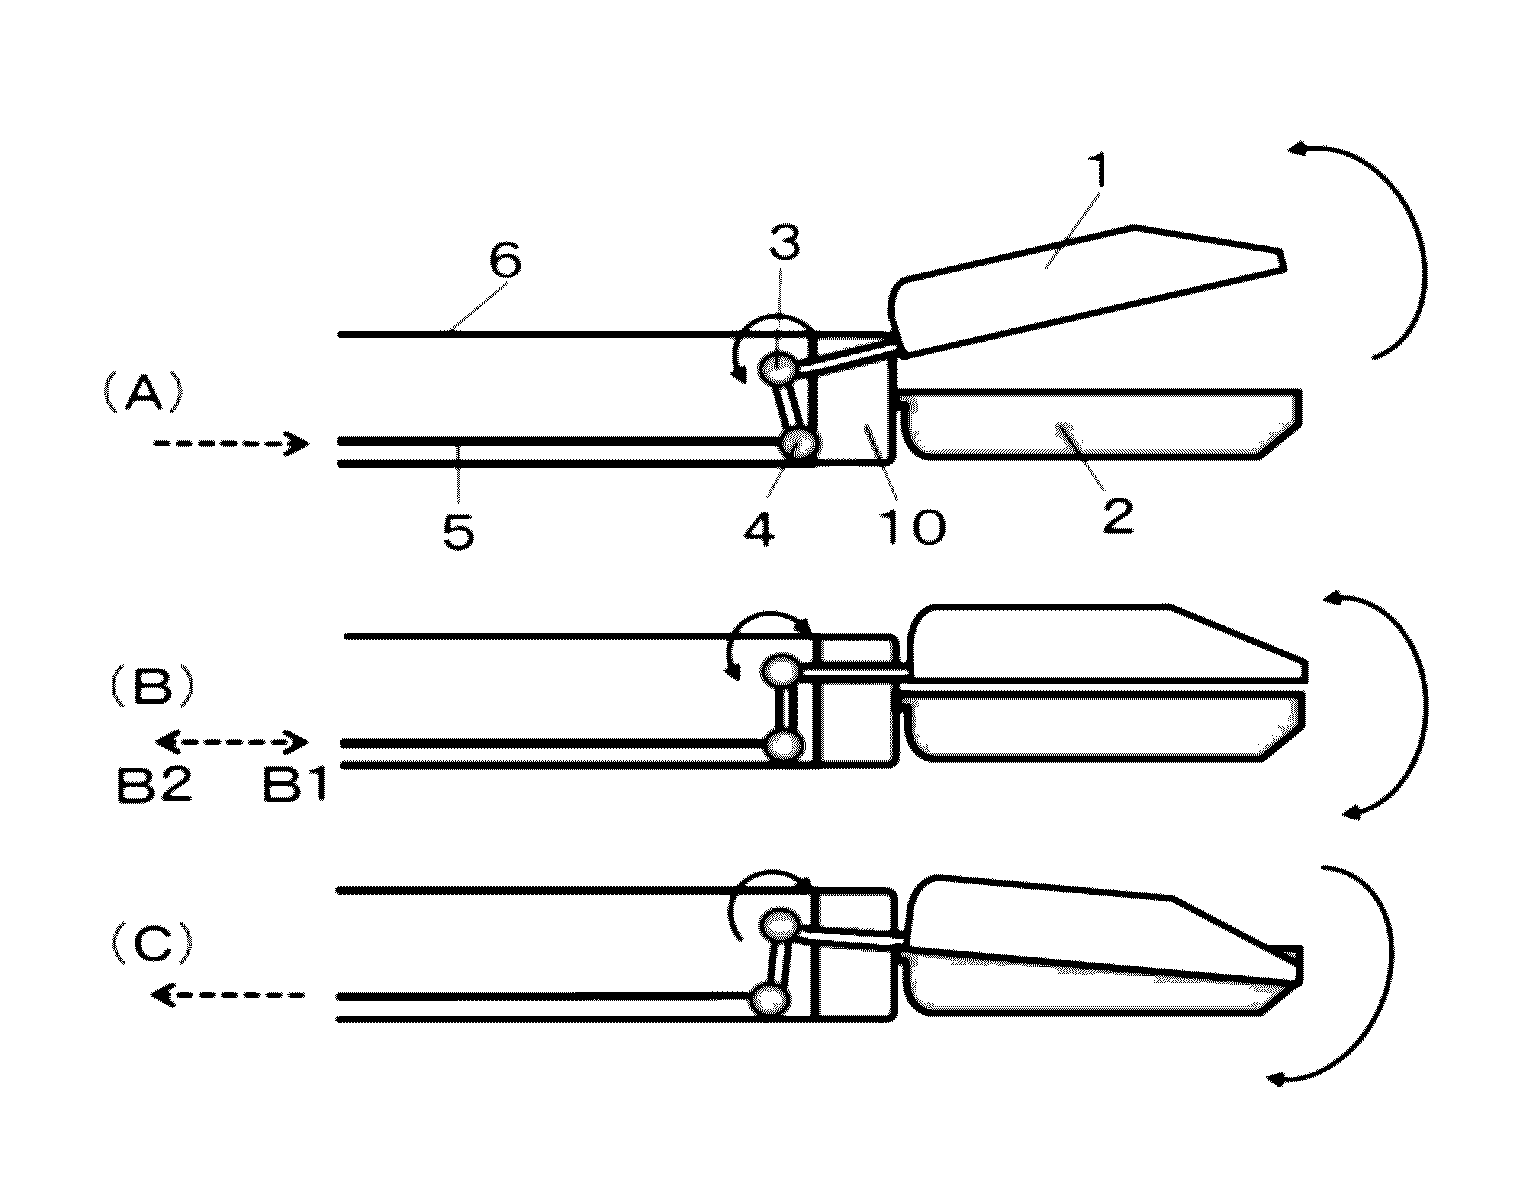 Medical treatment device for holding, coagulating, and cutting living tissue